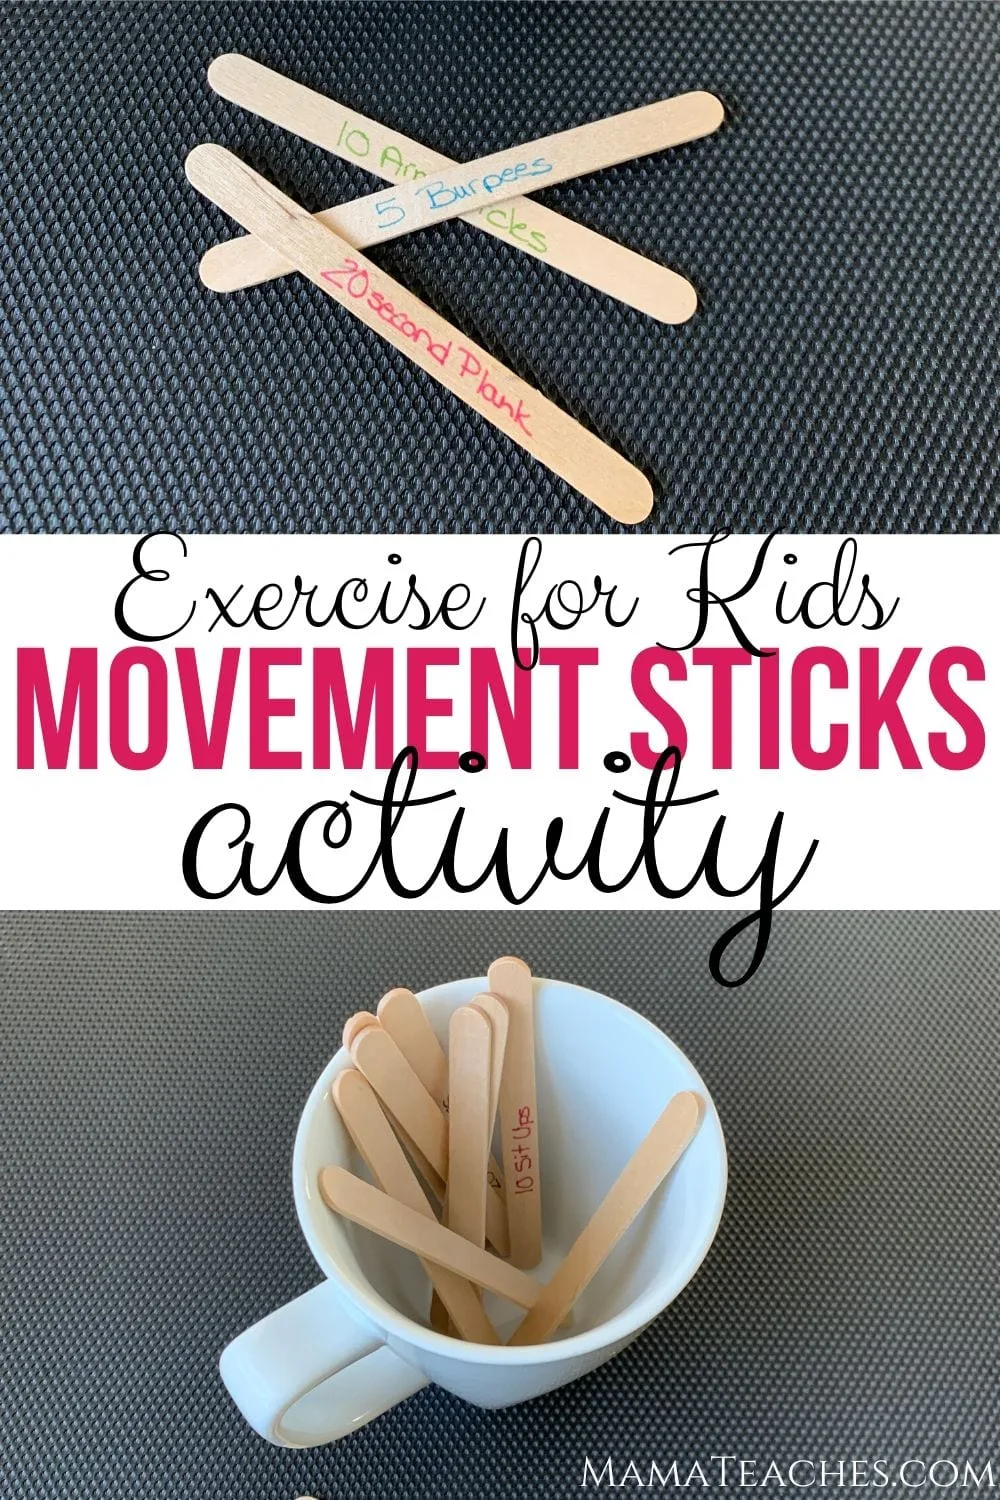 Exercise for Kids Movement Sticks Activity from MamaTeaches.com